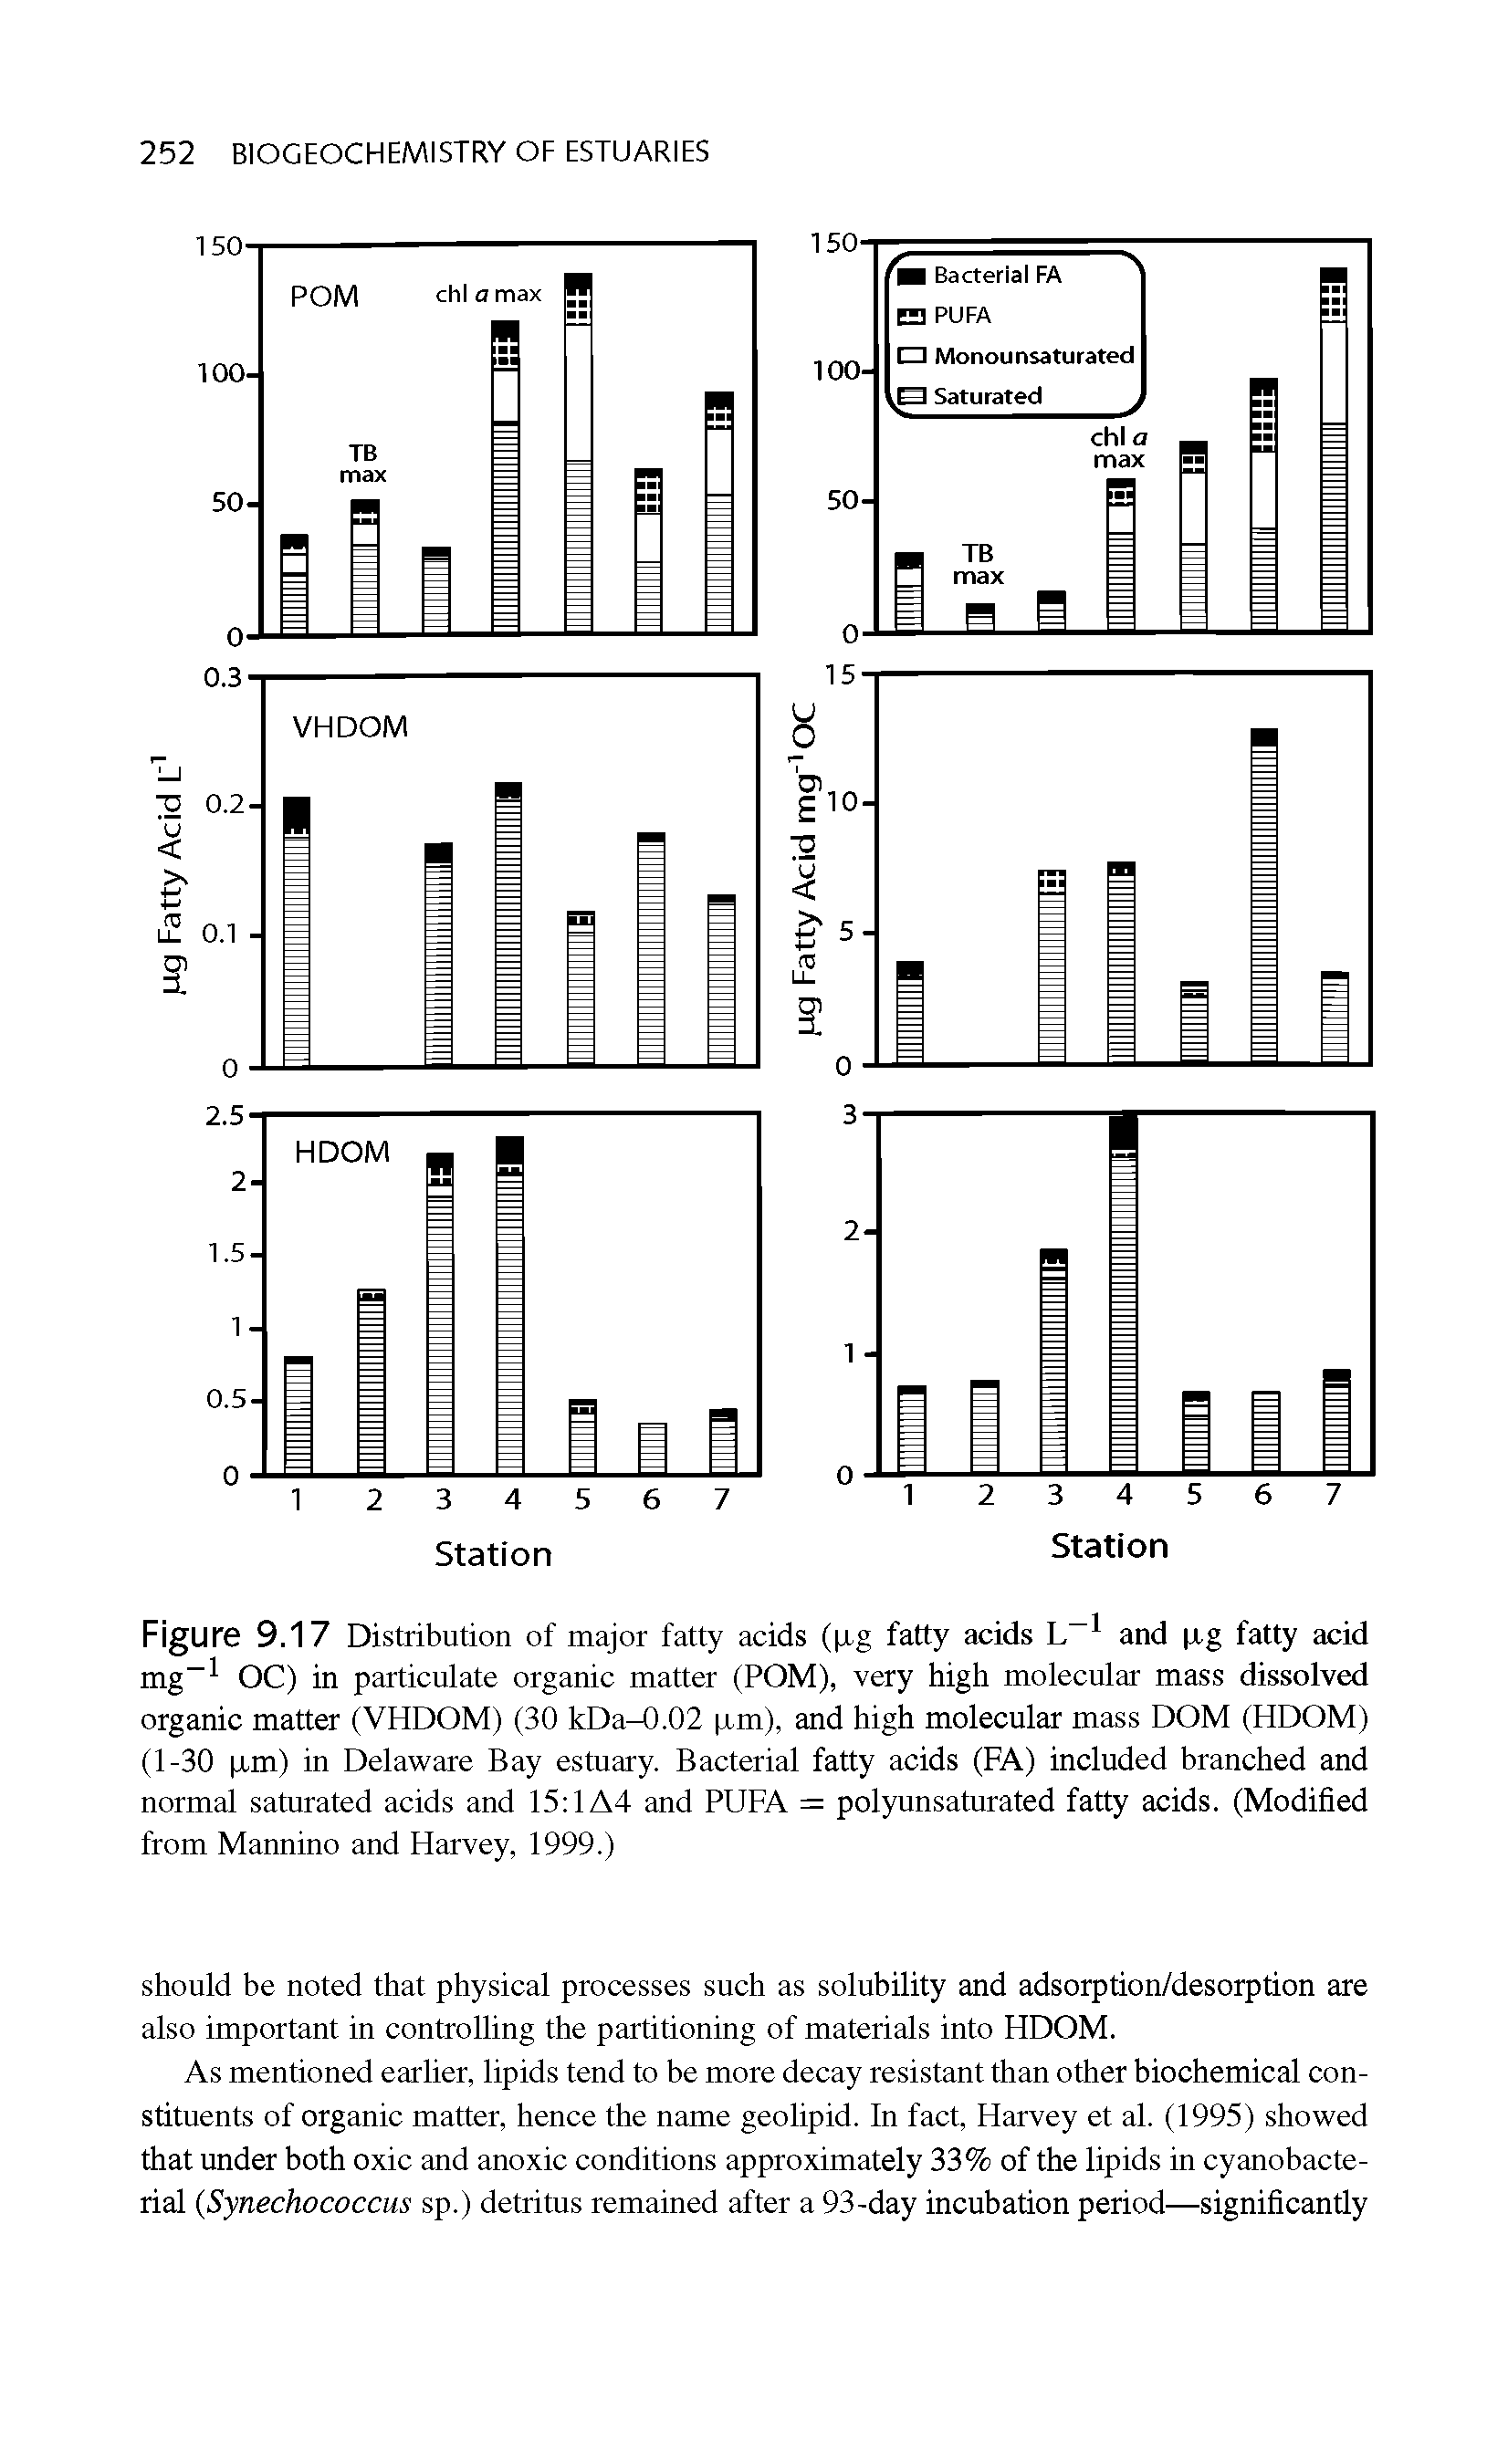 Figure 9.17 Distribution of major fatty acids ( xg fatty acids L-1 and xg fatty acid mg-1 OC) in particulate organic matter (POM), very high molecular mass dissolved organic matter (VHDOM) (30 kDa-0.02 xm), and high molecular mass DOM (HDOM) (1-30 xm) in Delaware Bay estuary. Bacterial fatty acids (FA) included branched and normal saturated acids and 15 1A4 and PUFA = polyunsaturated fatty acids. (Modified from Mannino and Harvey, 1999.)...